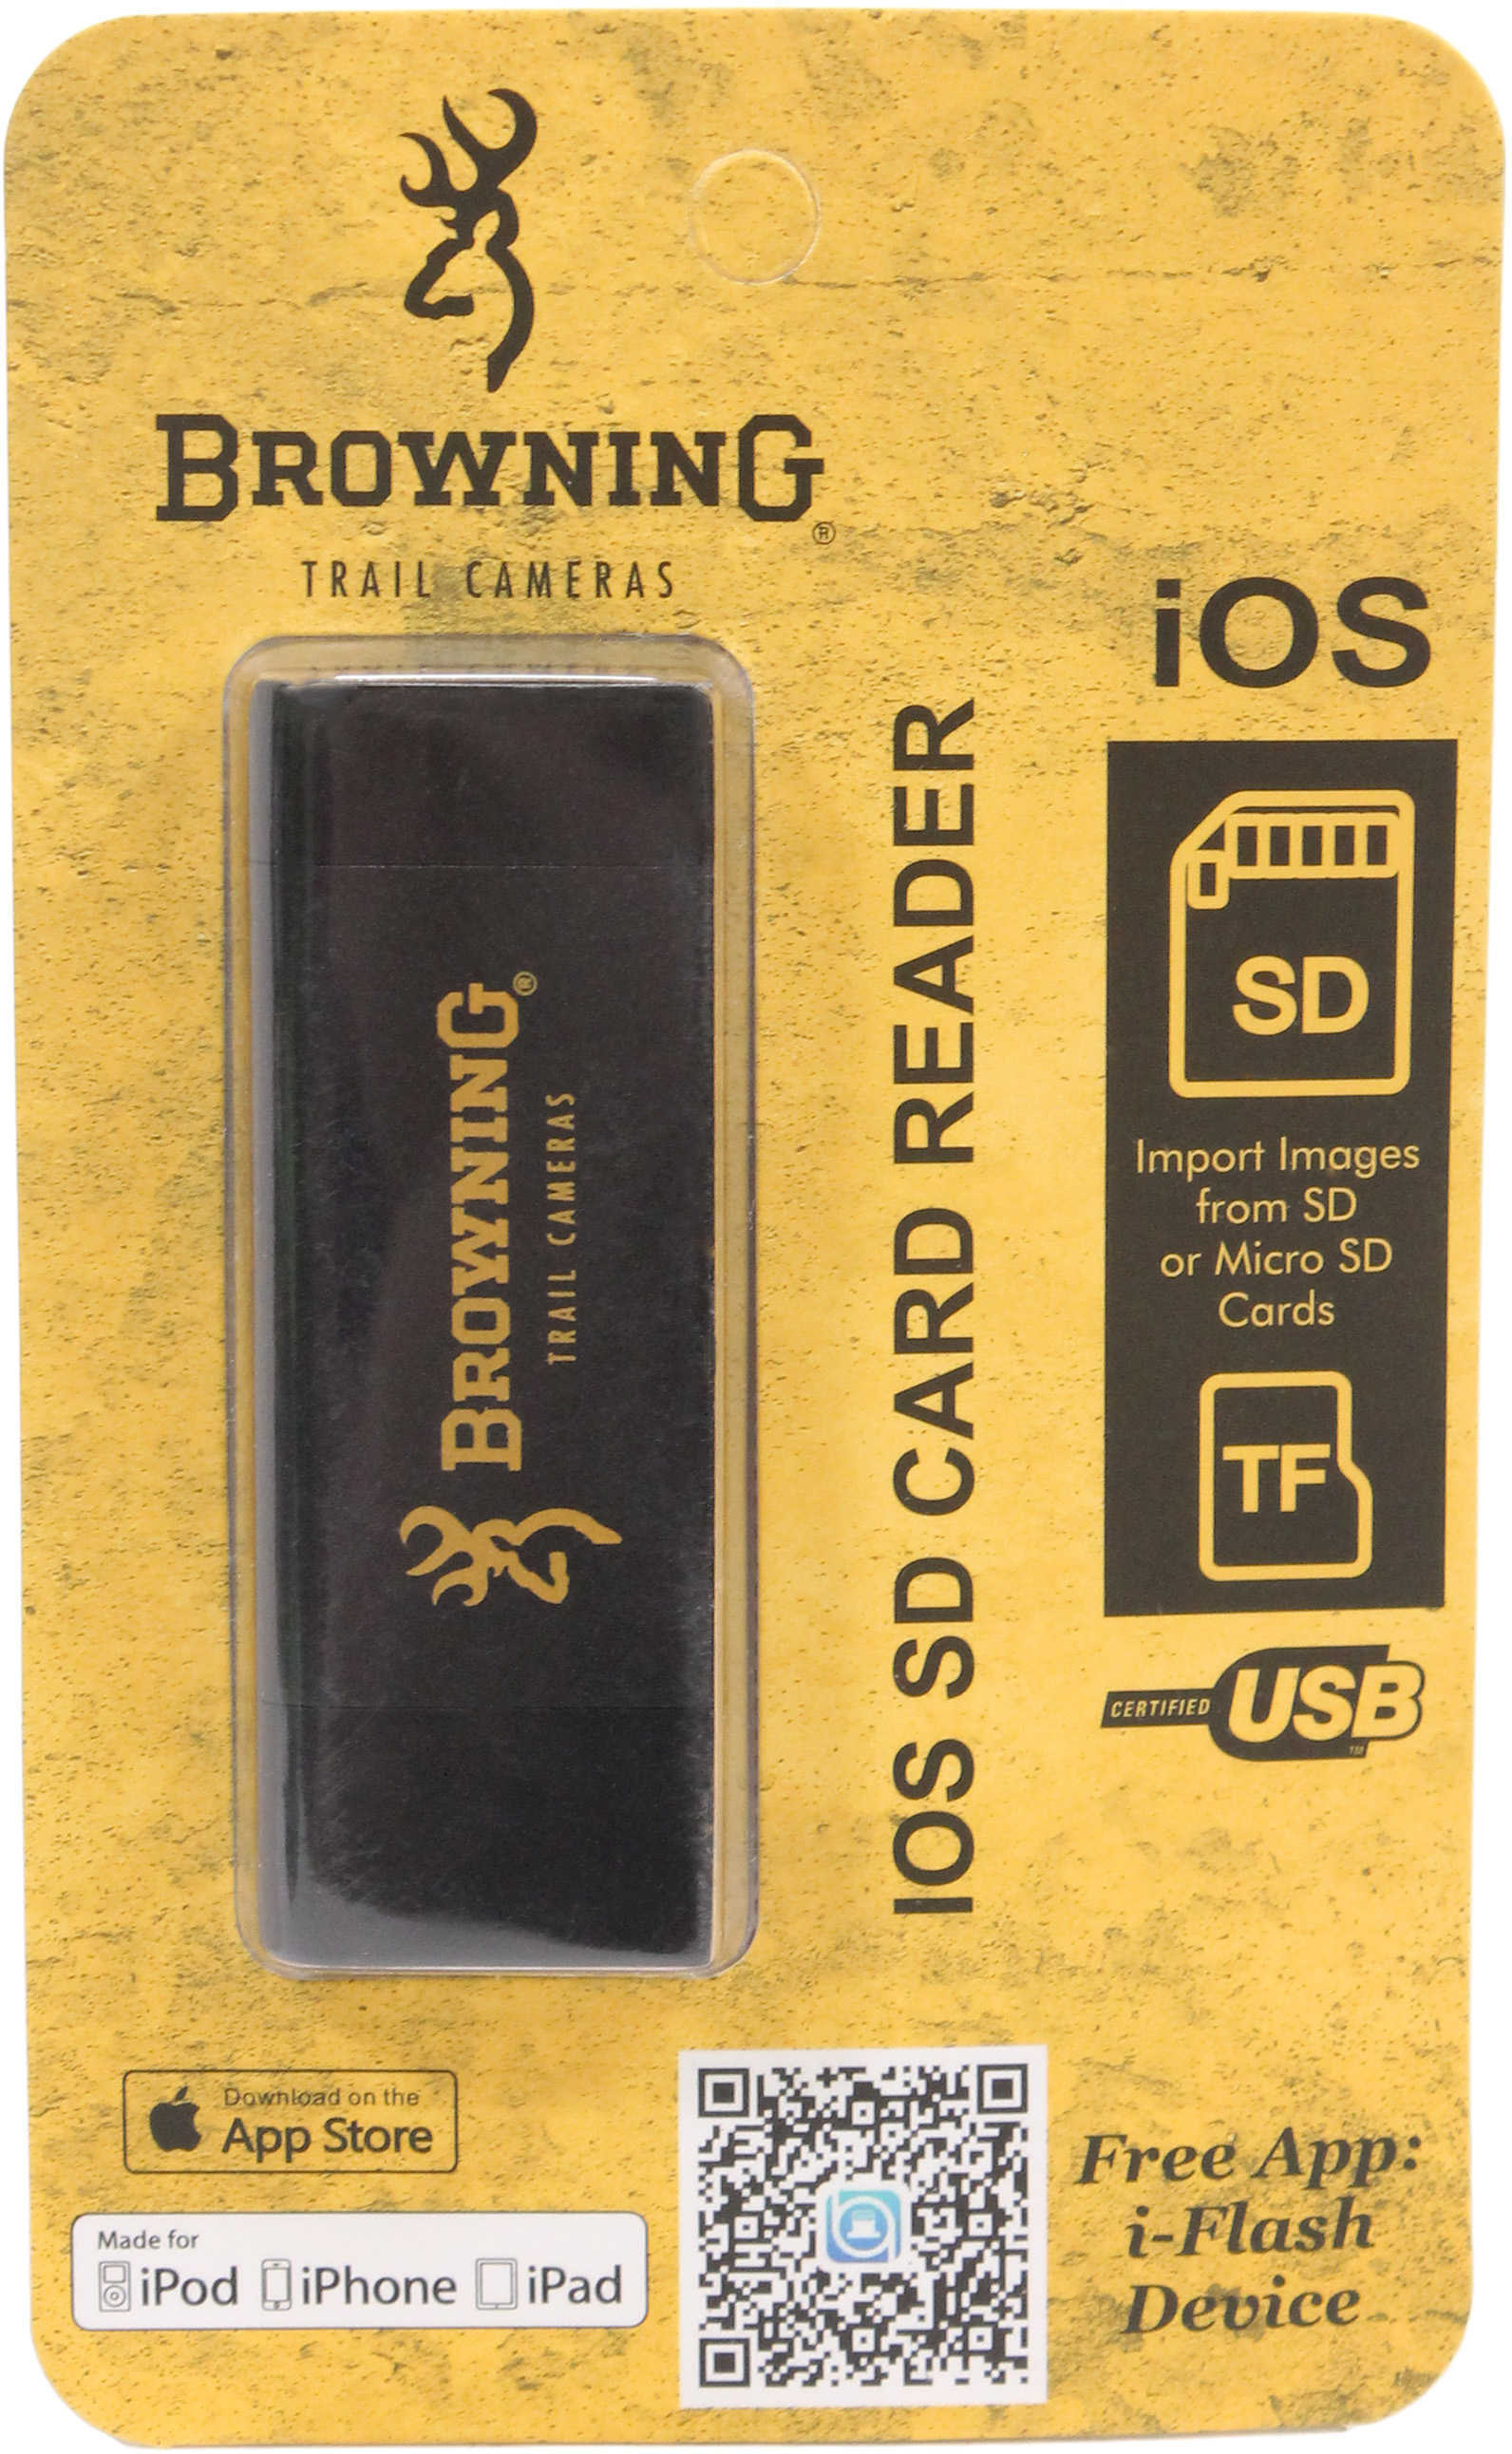 Browning Trail Camera Card Reader For Android & Ios Devices Model: BTCCR-UNI